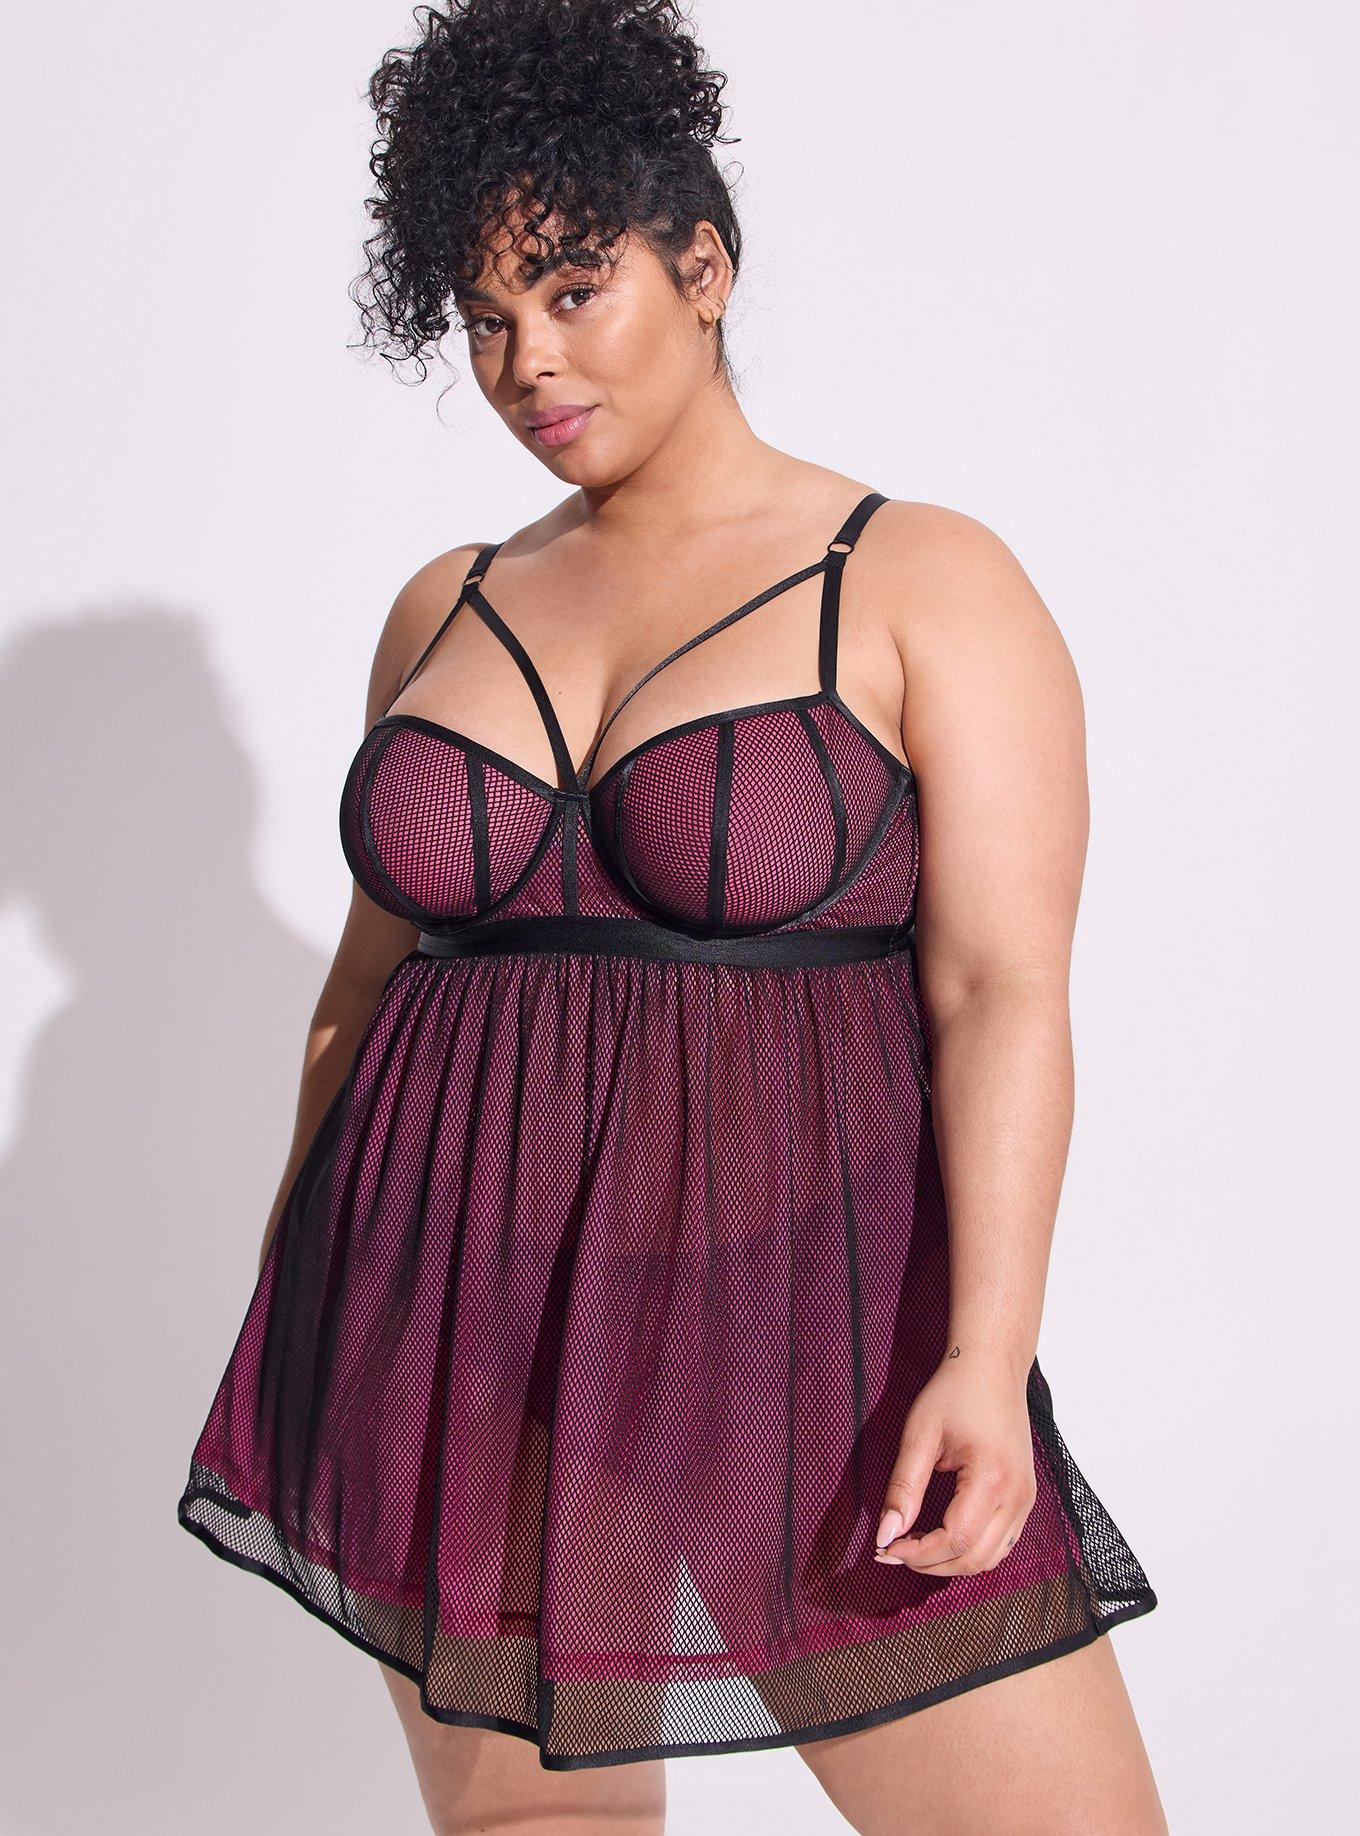 Plus Size - Underwire Babydoll Top - Lace & Bow Red - Torrid